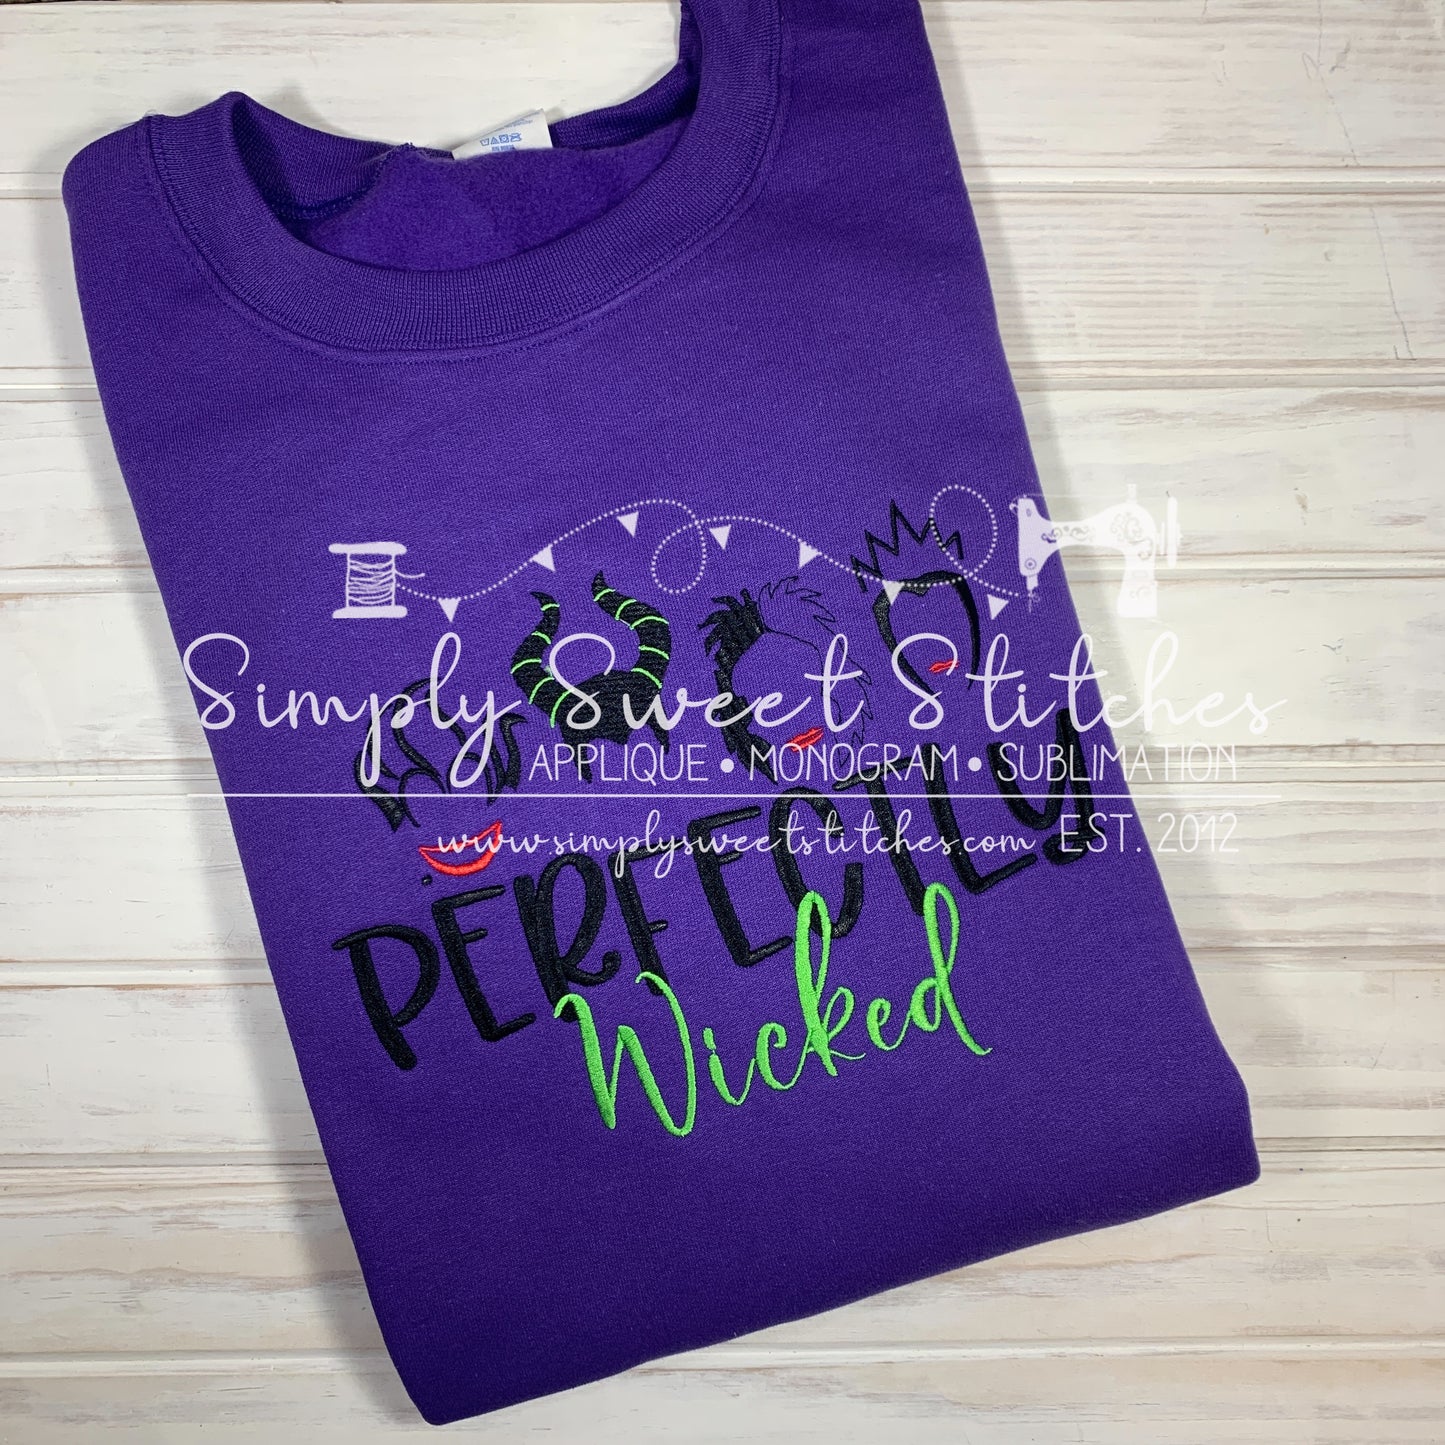 1941 - PERFECTLY WICKED - ADULT SHIRT